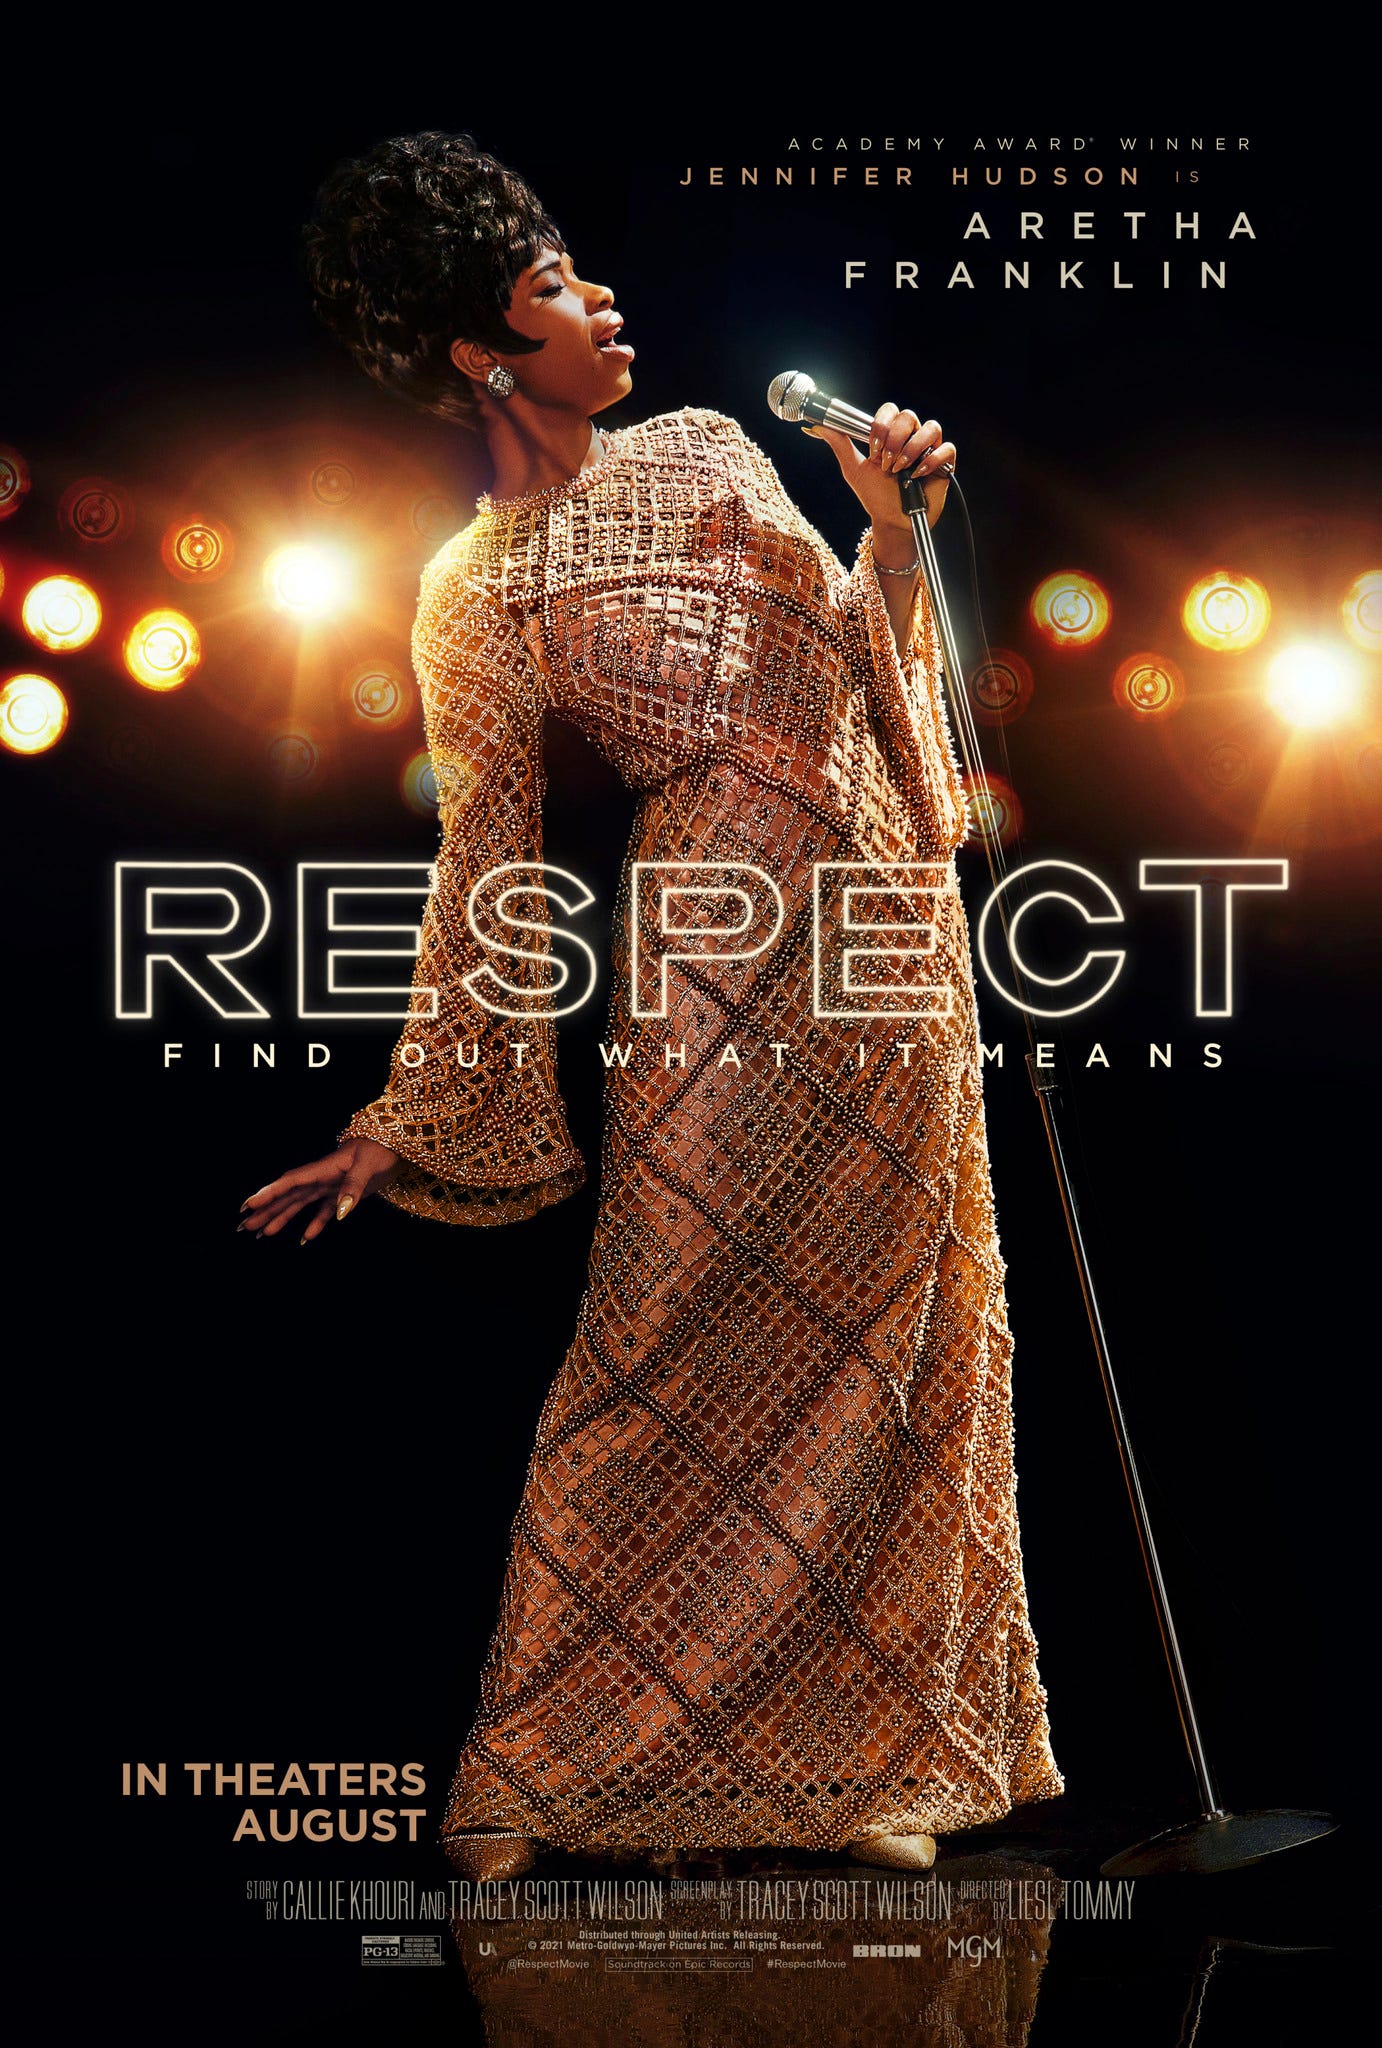 Aretha Franklin “Respect” The Movie- August 13th